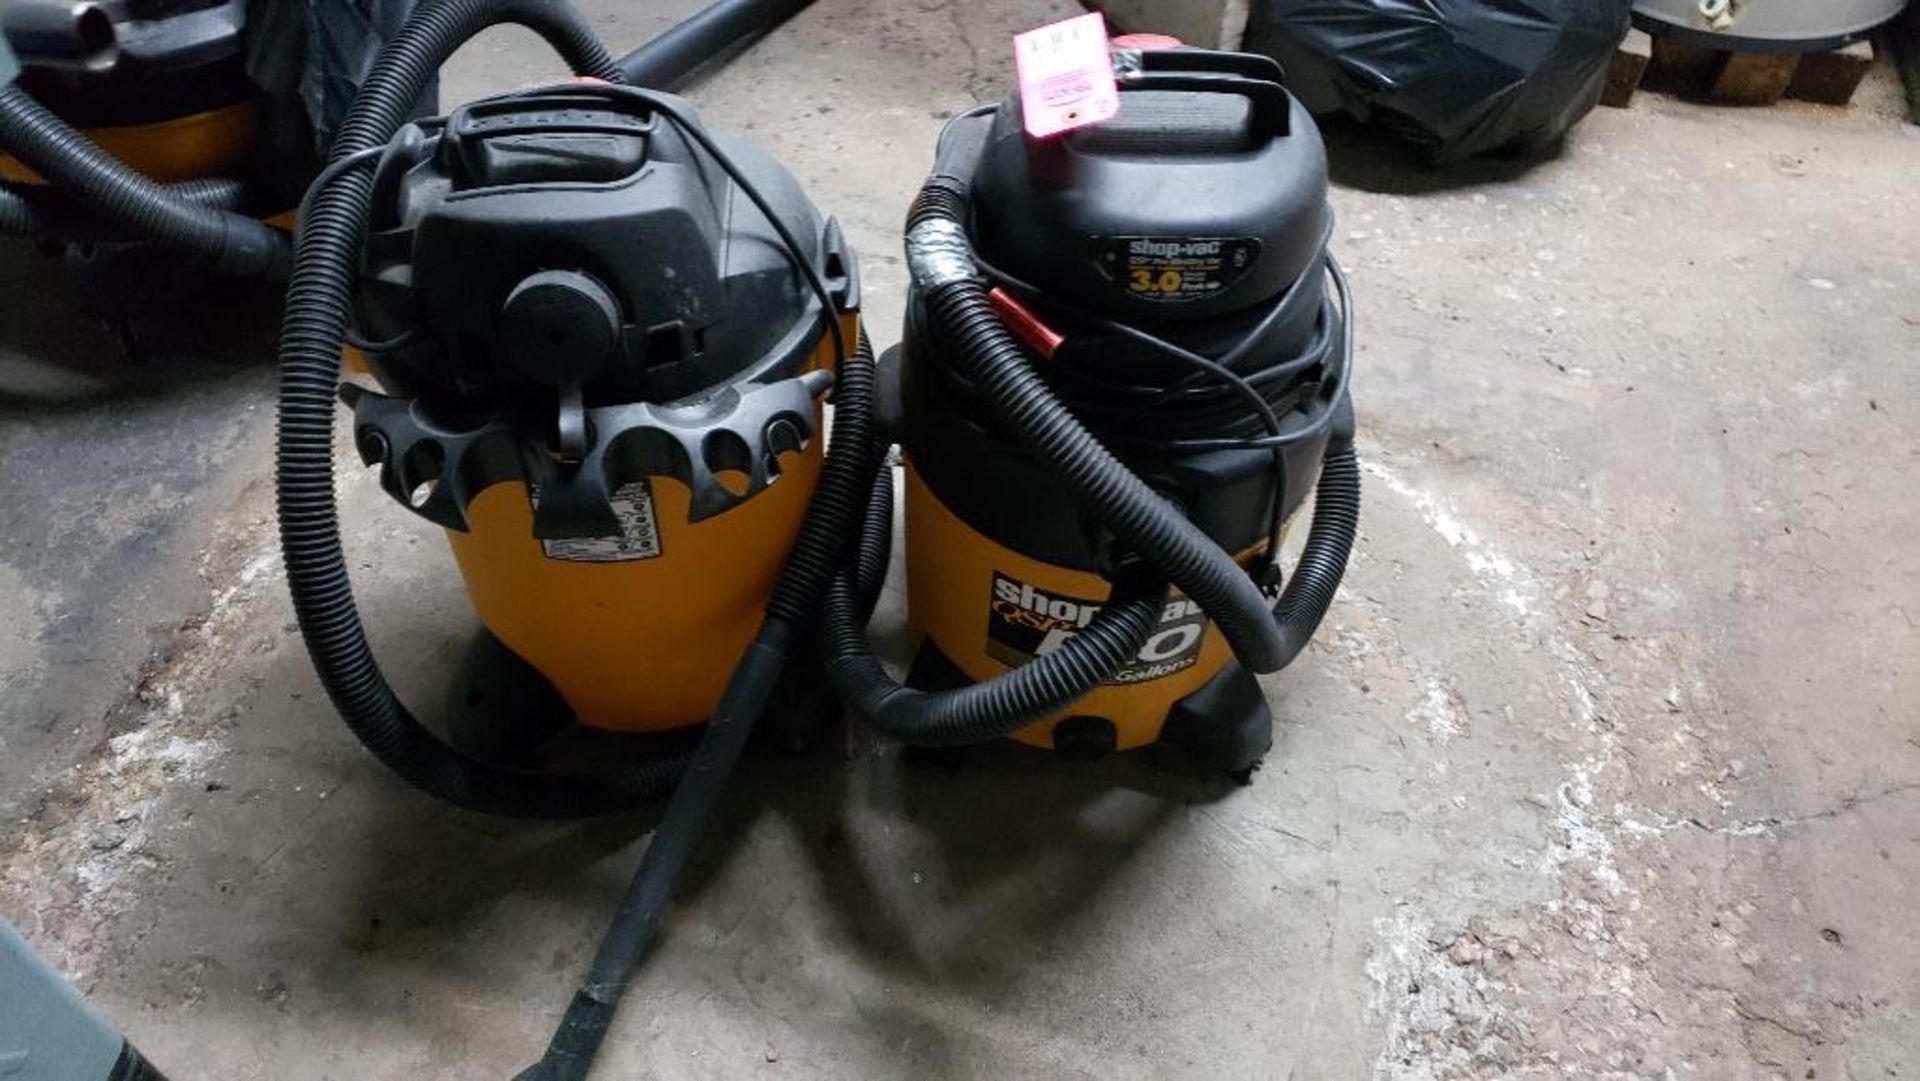 Qty 2 - Shop Vac. One 4.0hp, 10 gallon, one unmarked. - Image 2 of 4